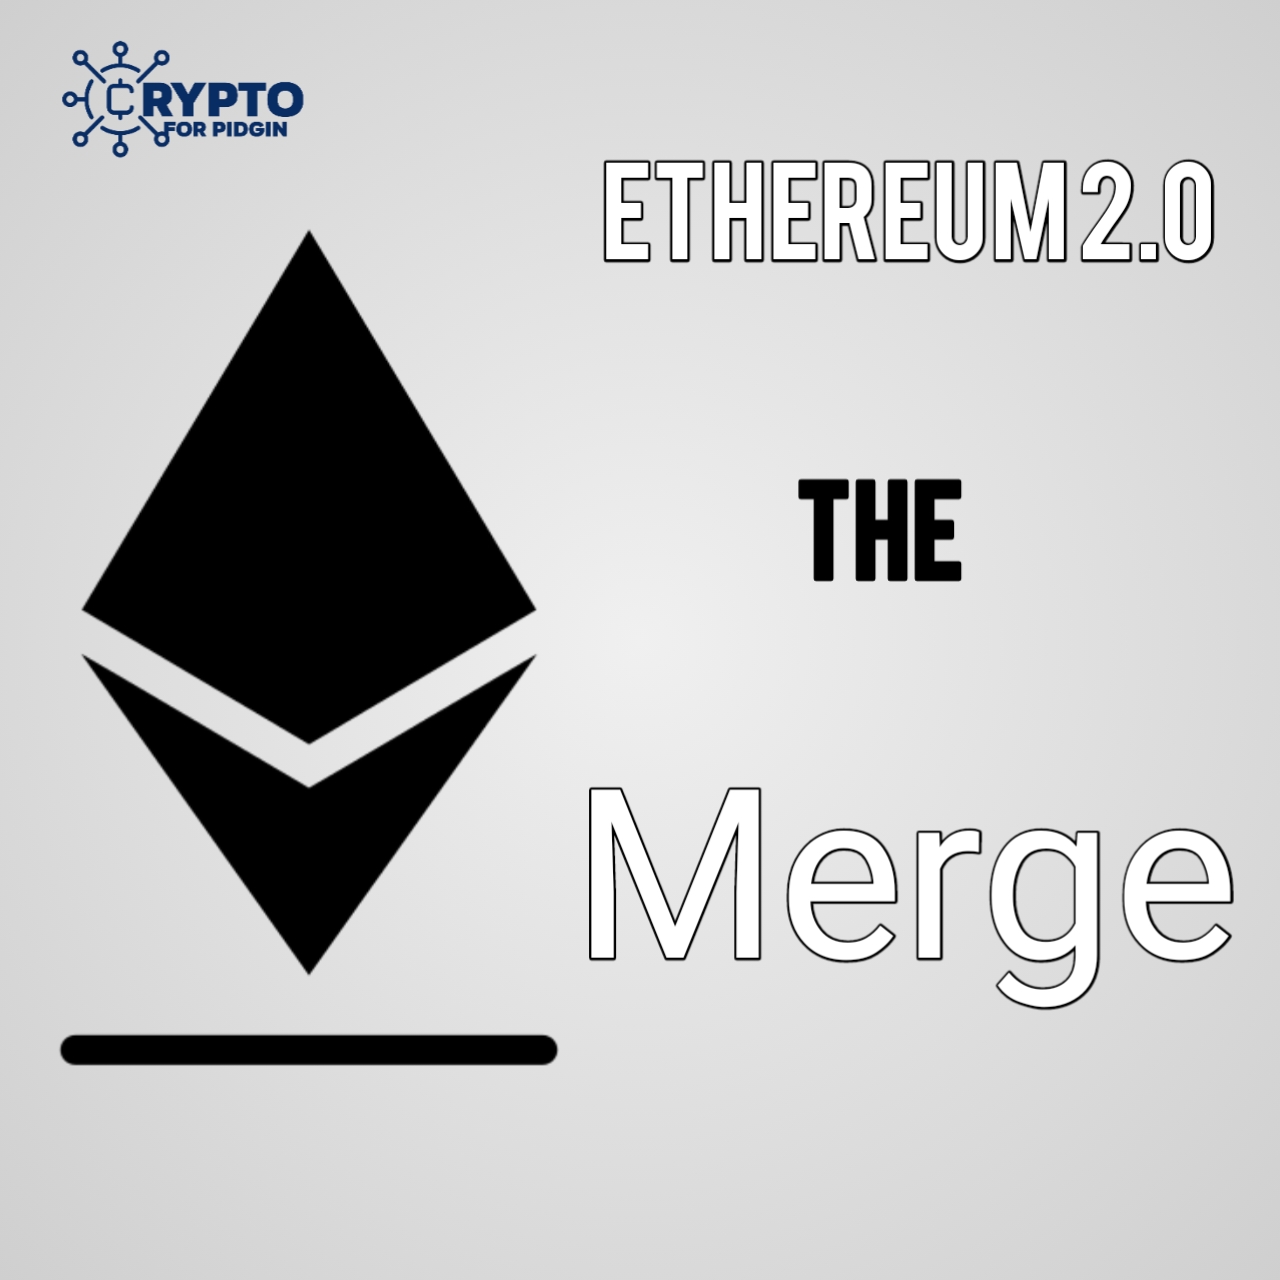 What to know about Ethereum 2.0